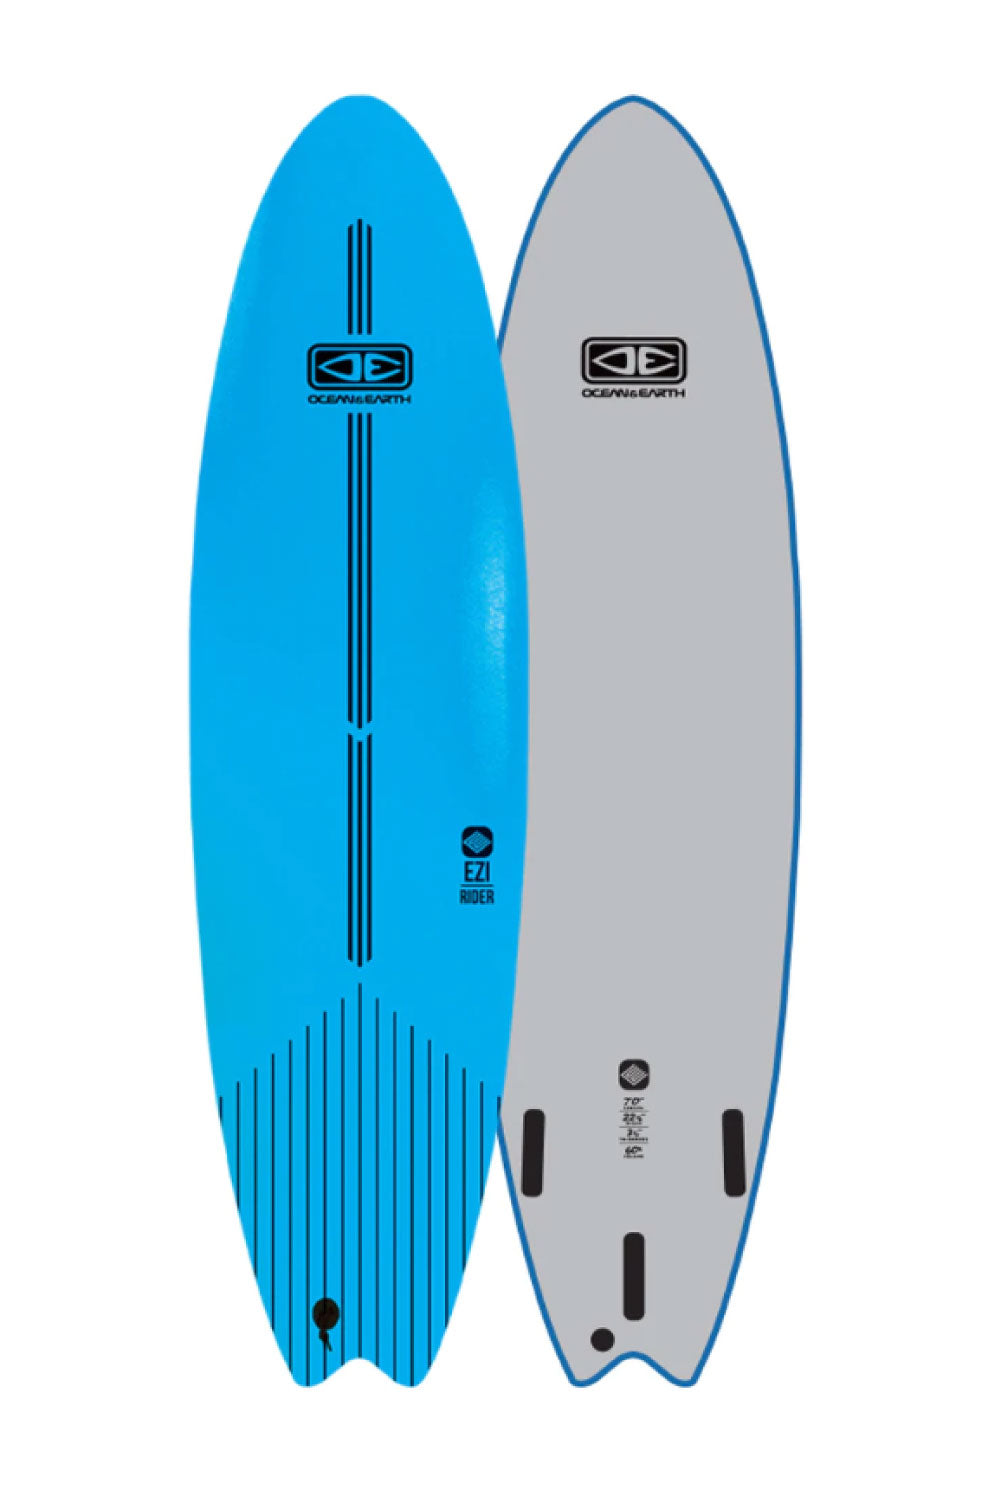 7ft Ocean & Earth Ezi Rider Softboard - Comes with fins